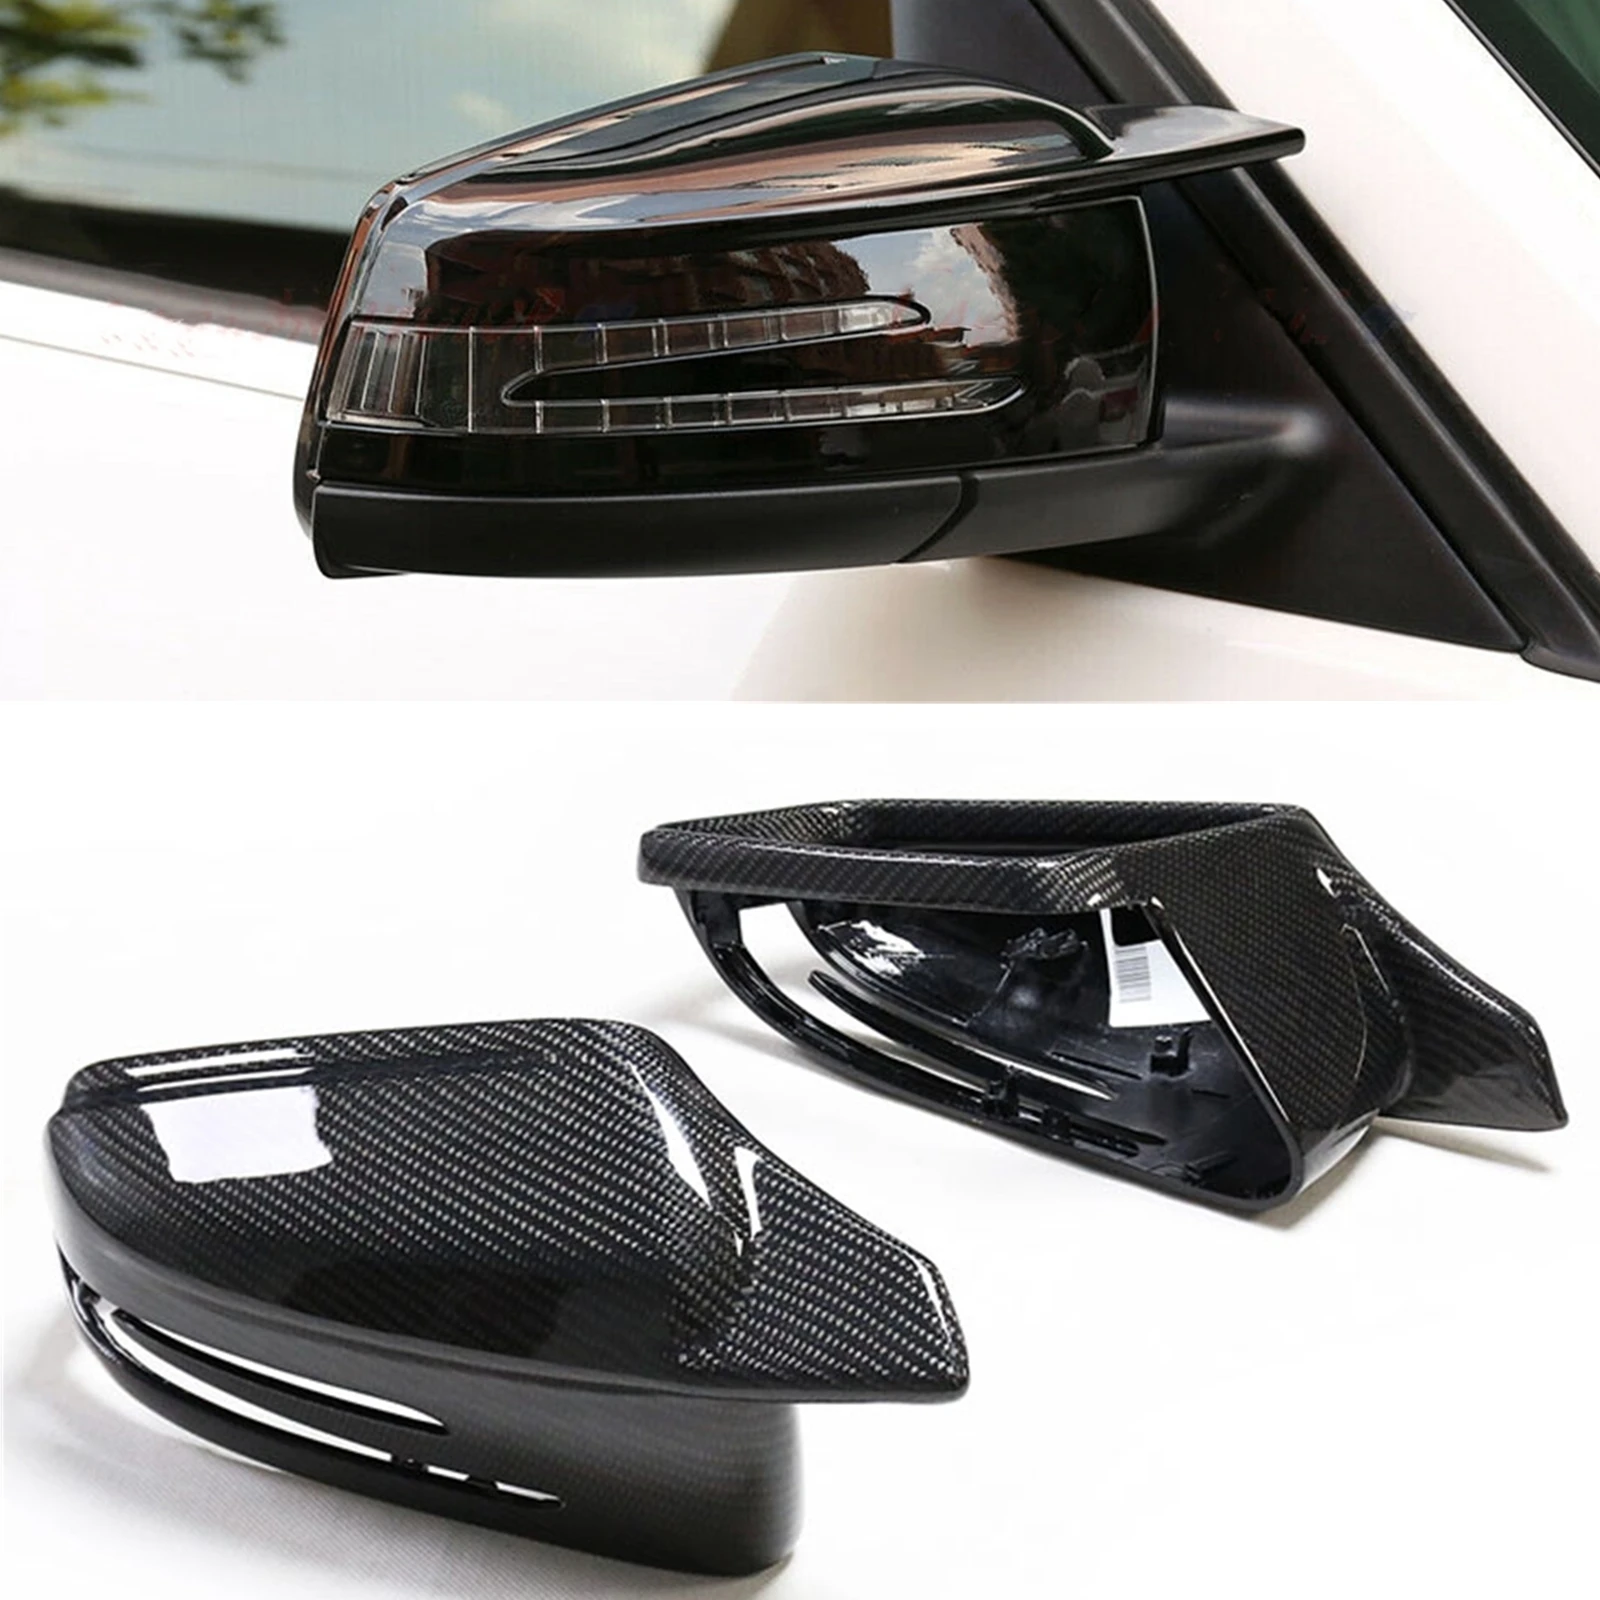 

Mirror Cover Caps For Mercedes Benz A W176 B W246 C W204 E W212 S W221 CLA W177 CLS W218 GLK X204 GLA Carbon Fiber Replacement